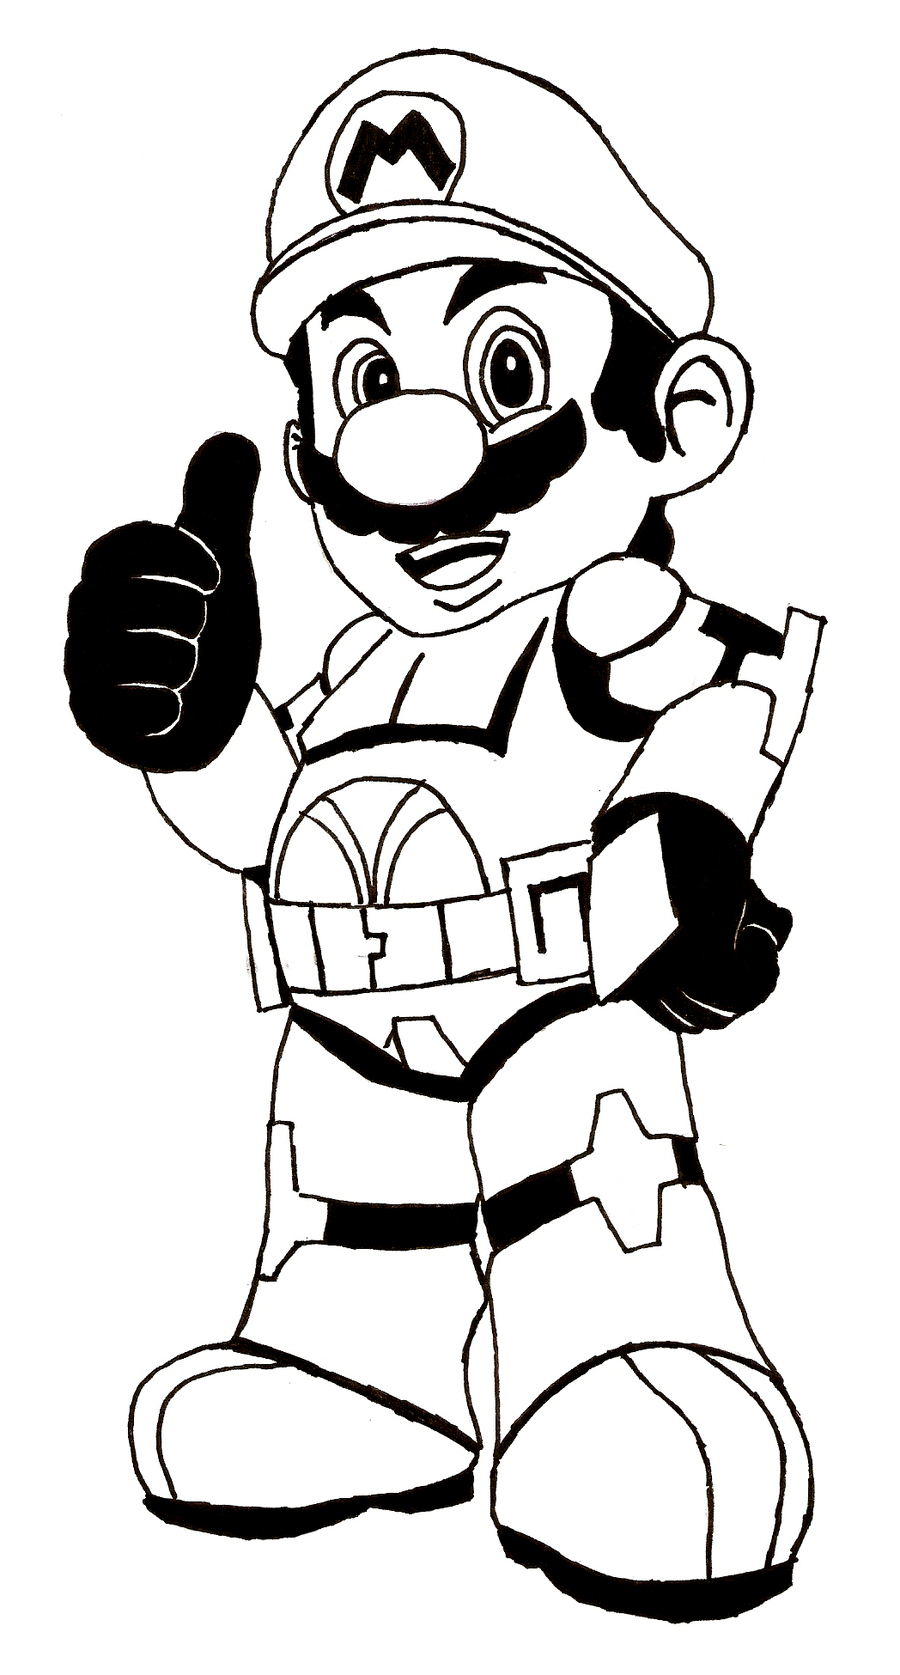 Mario Coloring Pages To Print Best Of Mario Coloring Pages Built Imagination With Coloring